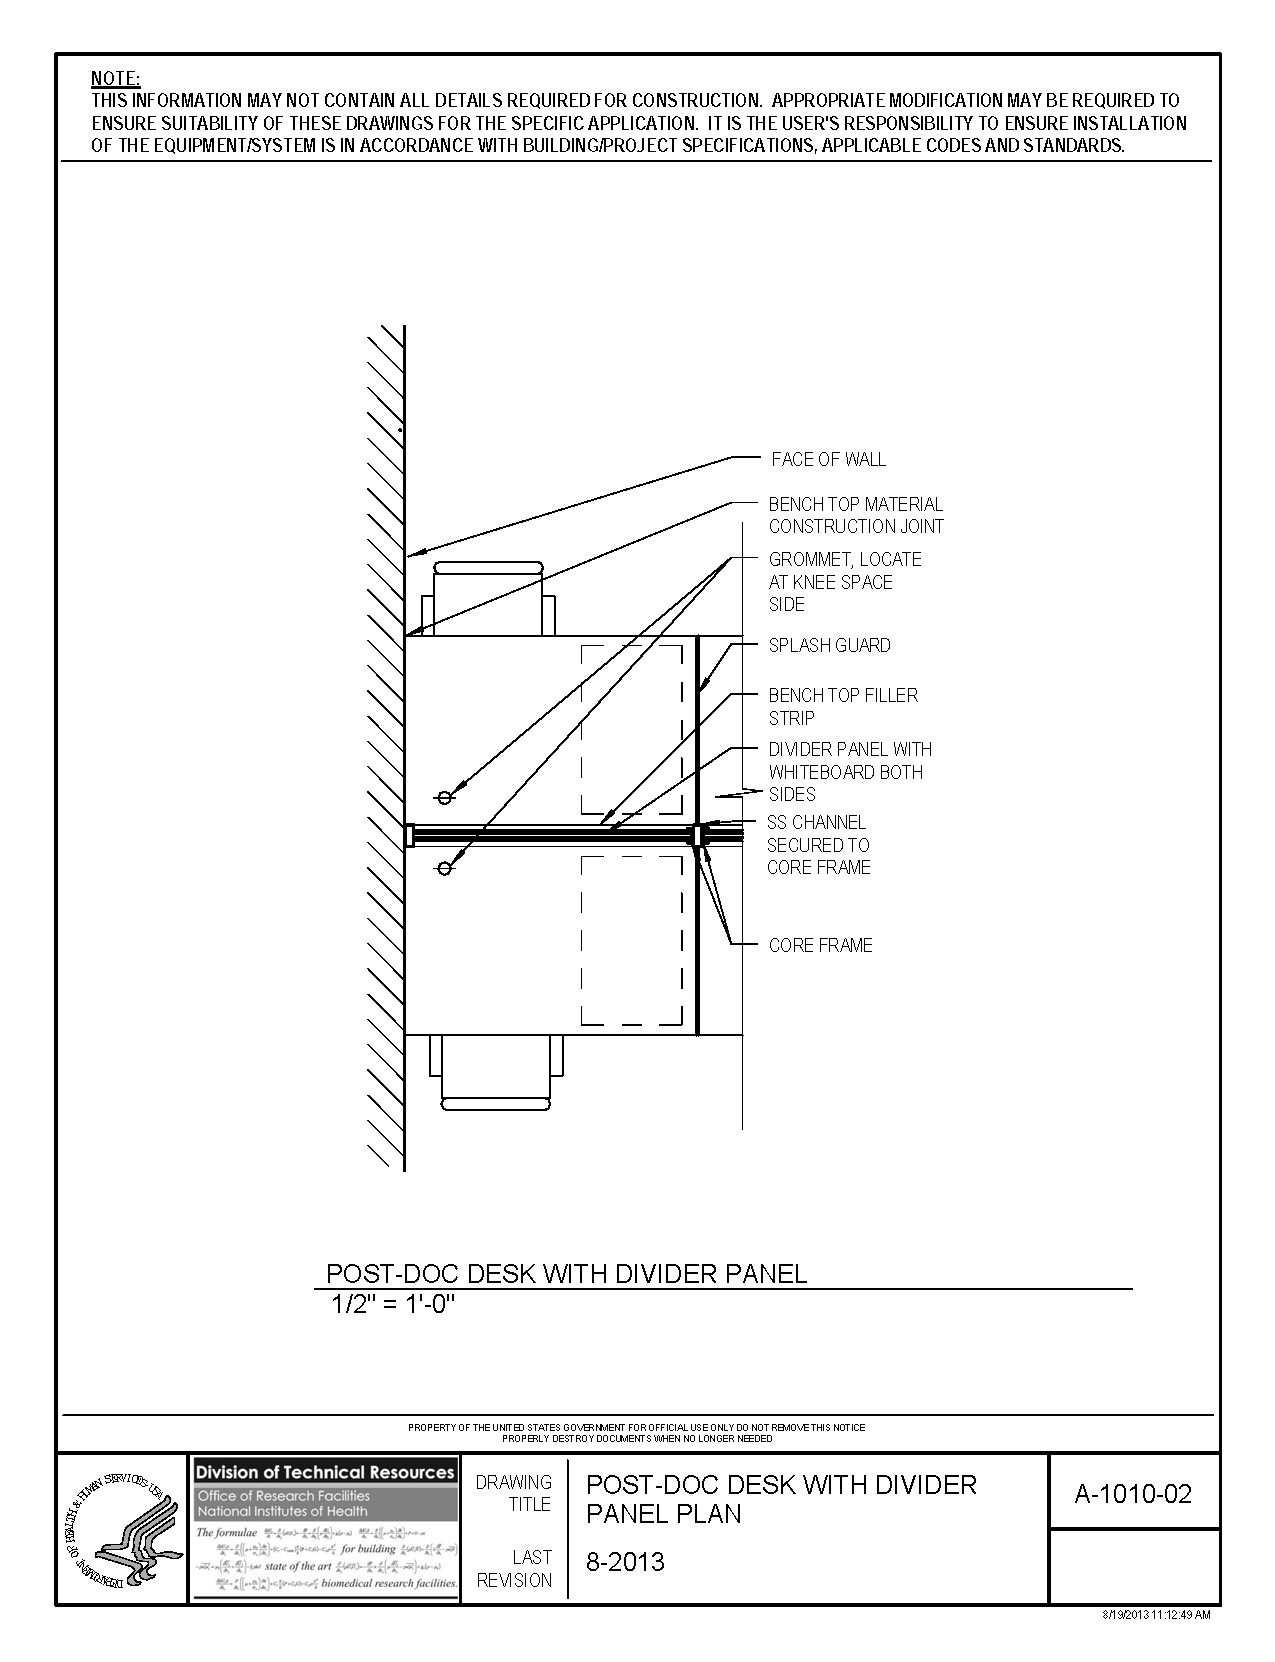 Wiring Diagram for Under Cabinet Lighting New How to Wire Under Cabinet Lighting Diagram Inspirational Nih